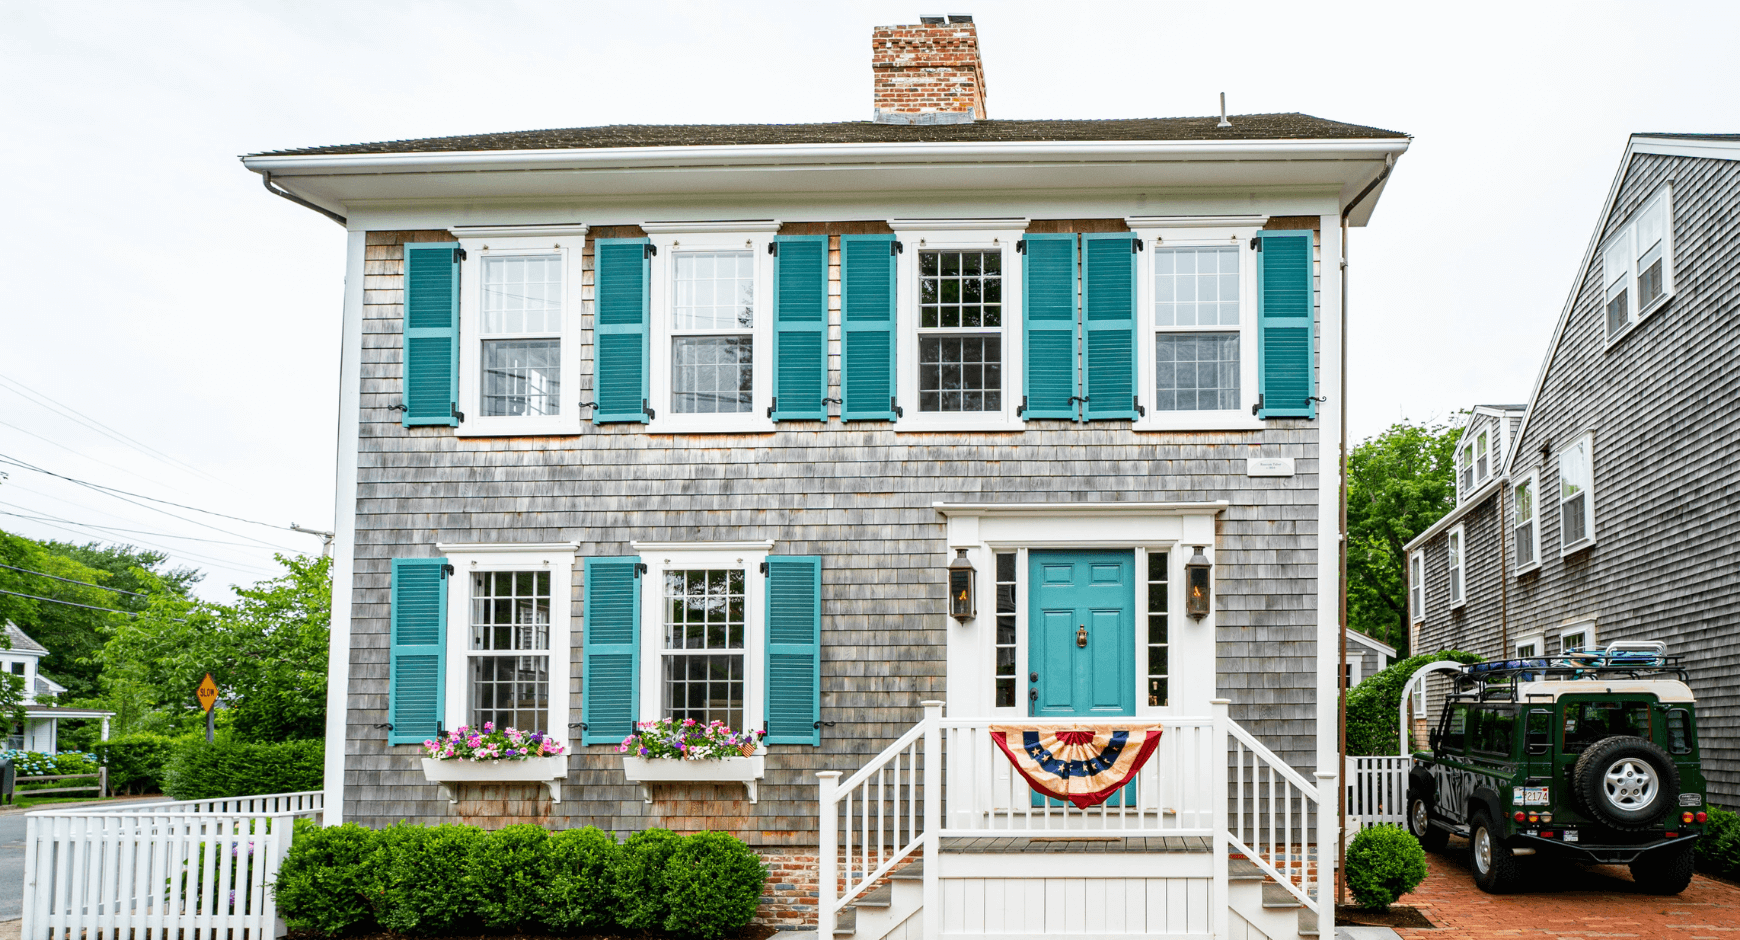 Image of a home with farmhouse window trim and blue shutters